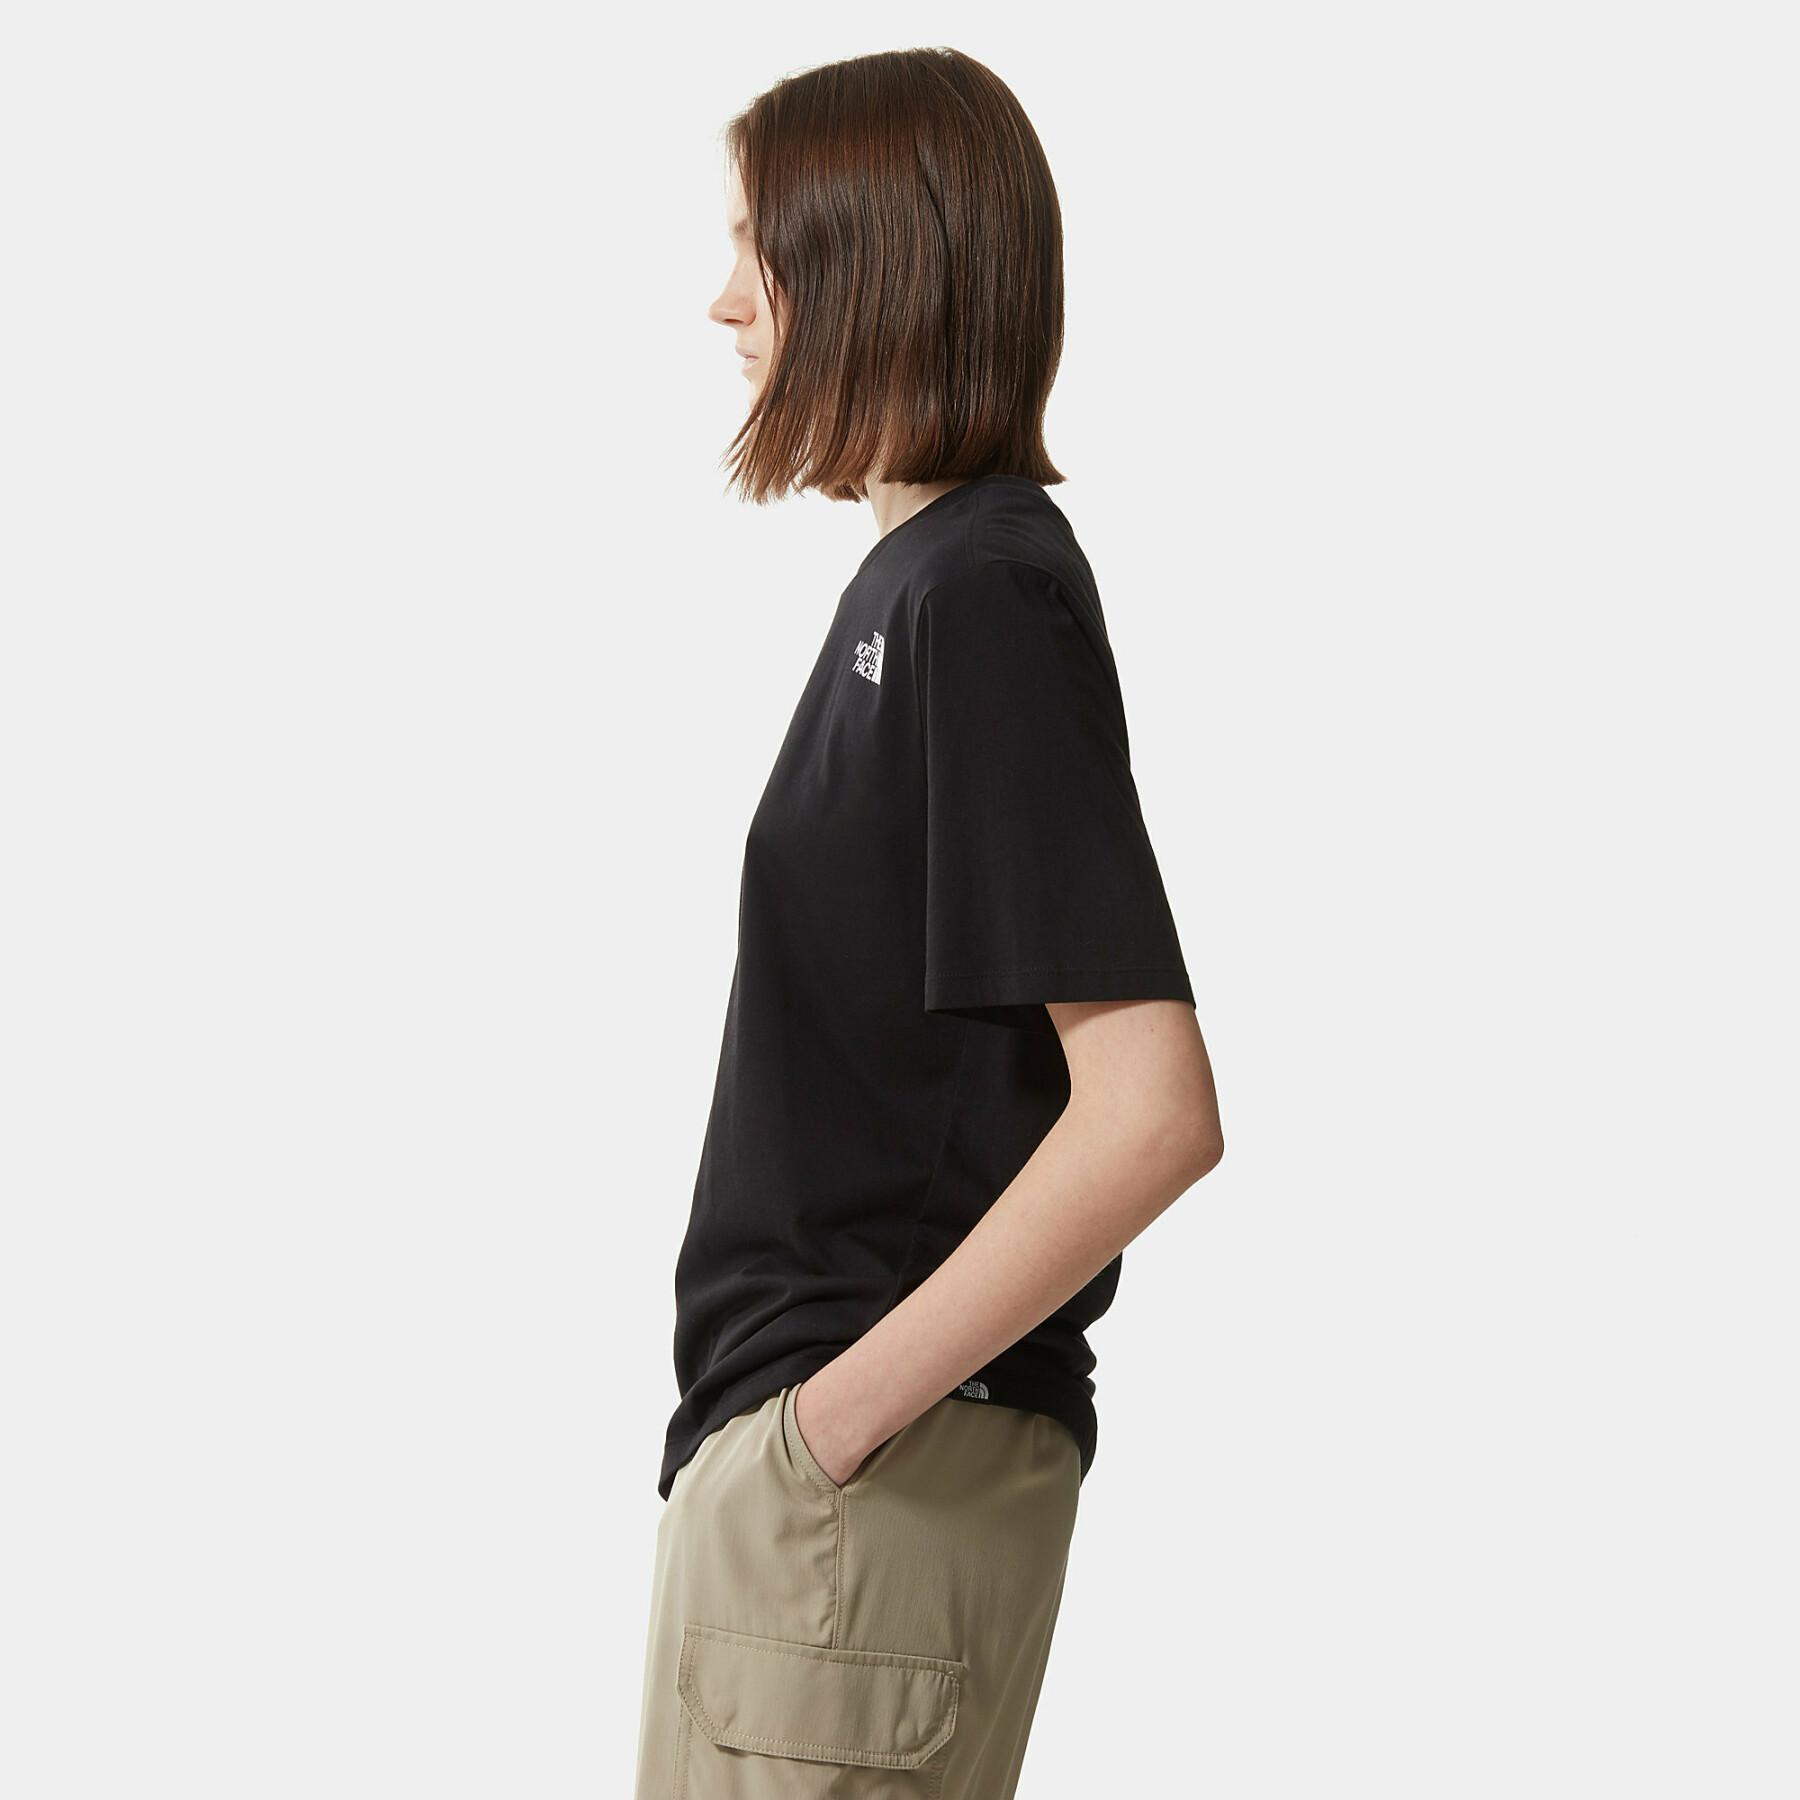 T-shirt mulher The North Face Redbox